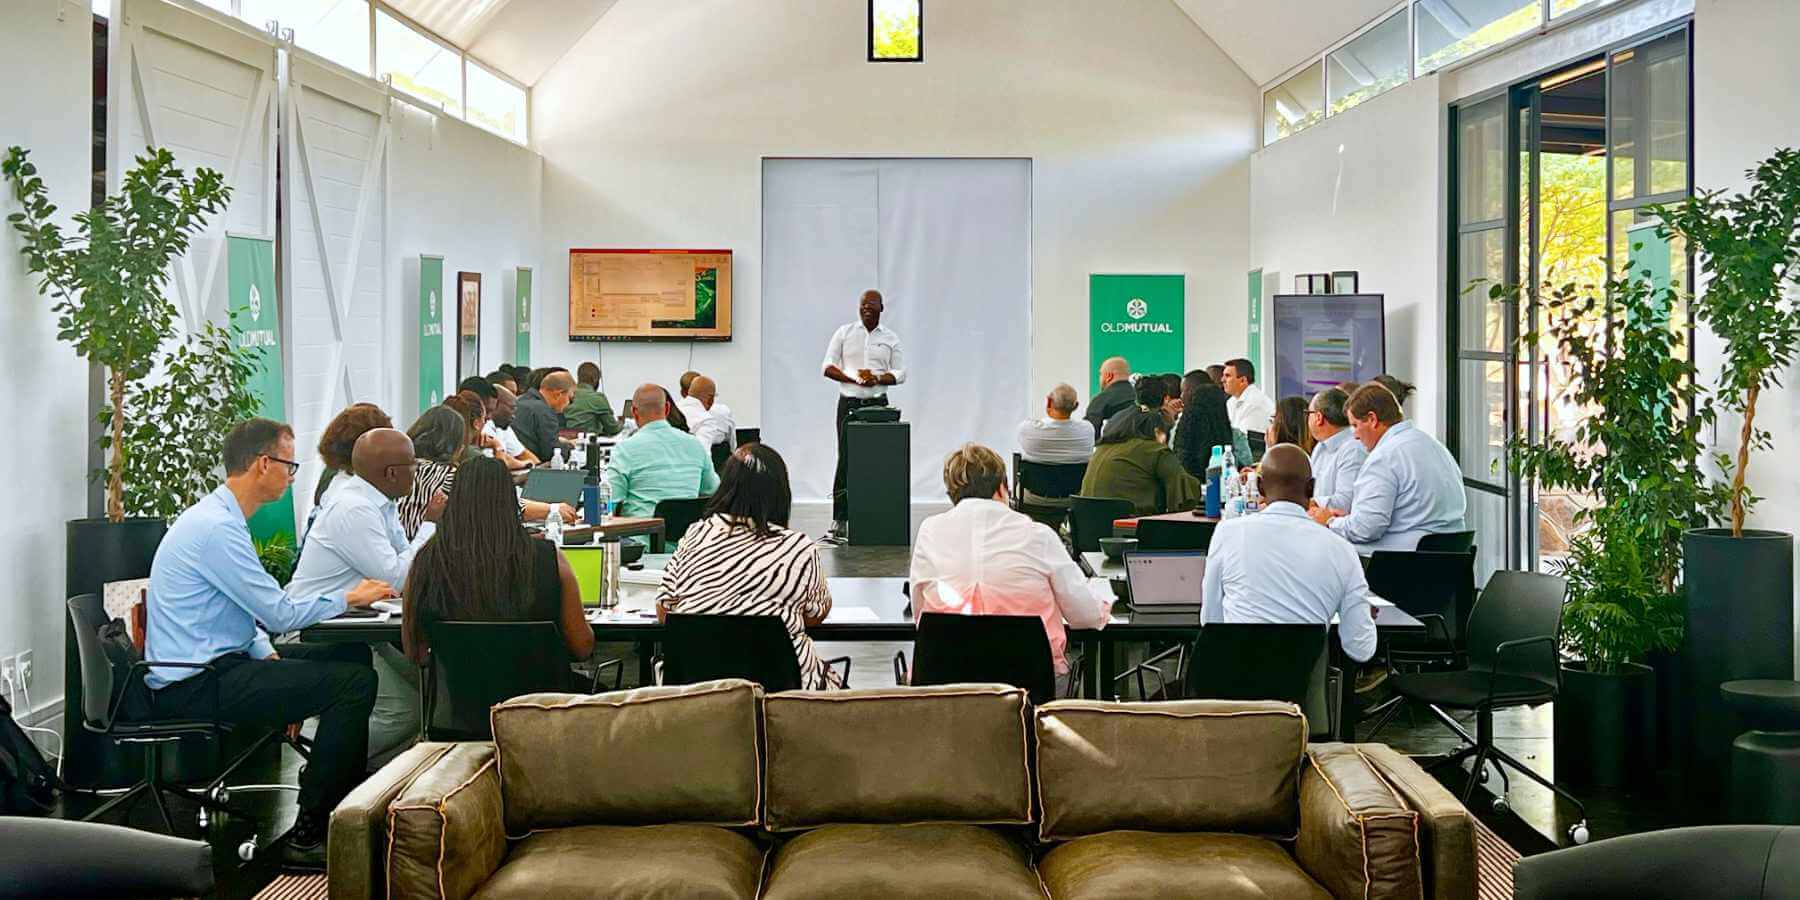 A photograph of a corporate brainstorming event taking place at the Sandwerf conference facilities.